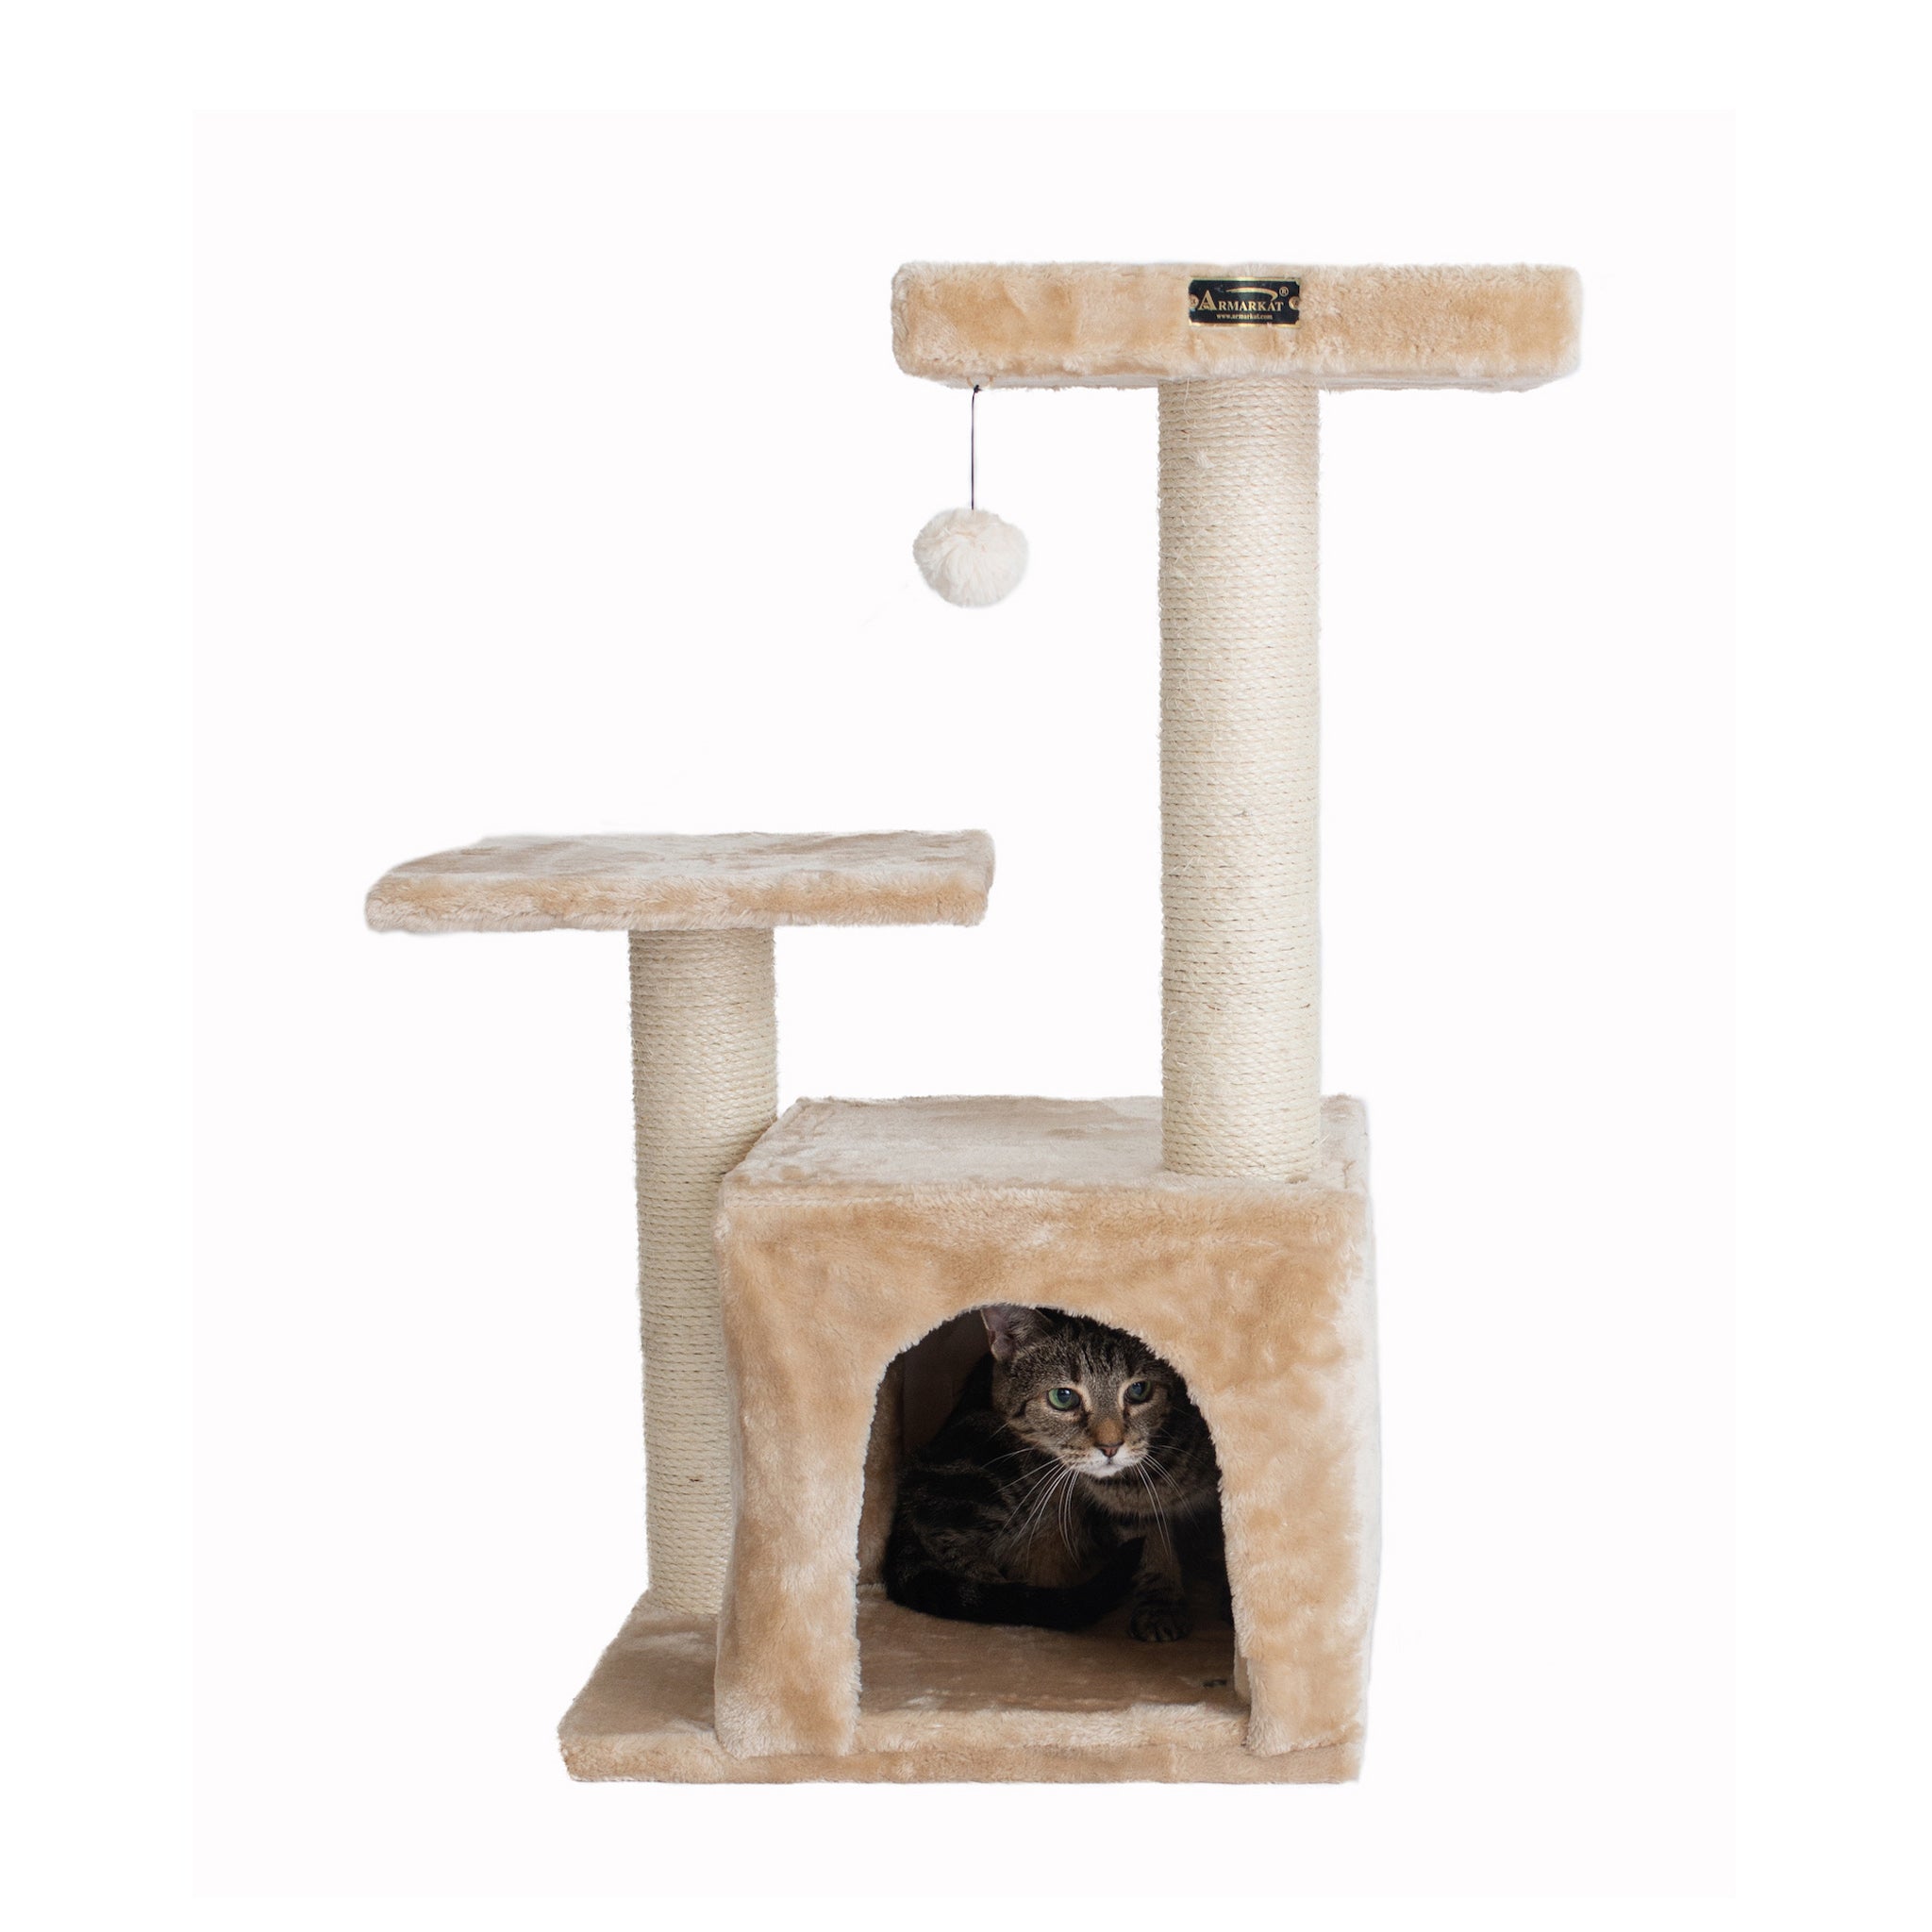 Armarkat Classic real wood Cat Tree A3207， 32-inch Beige